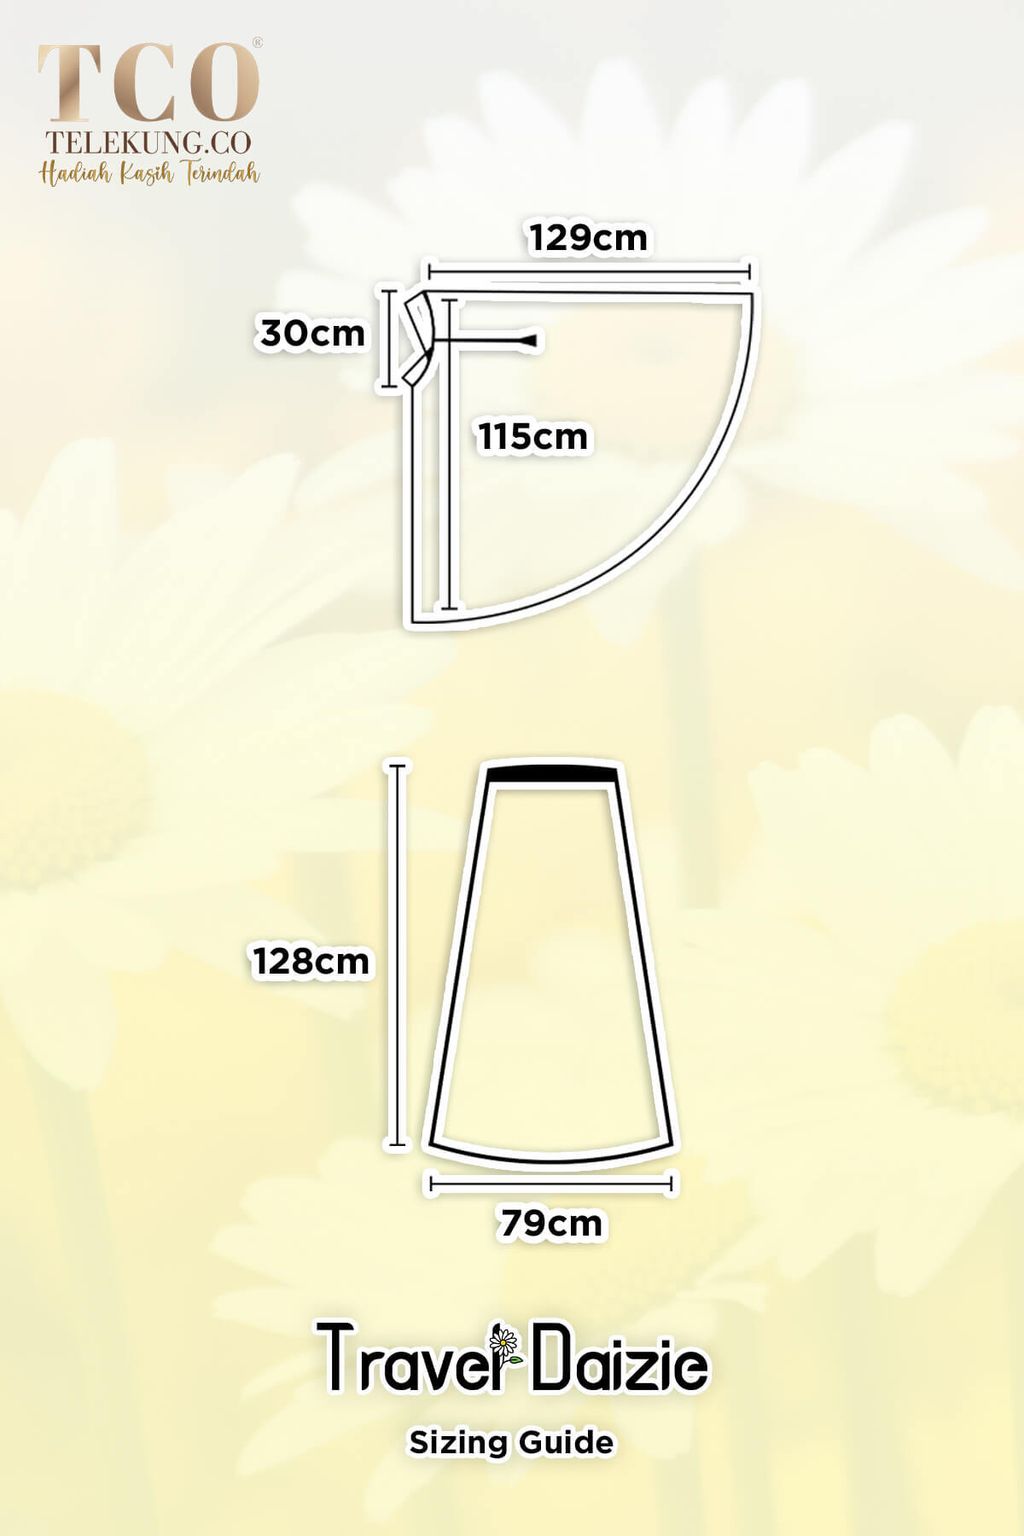 Telekung Daizie by TCO - Sizing guide